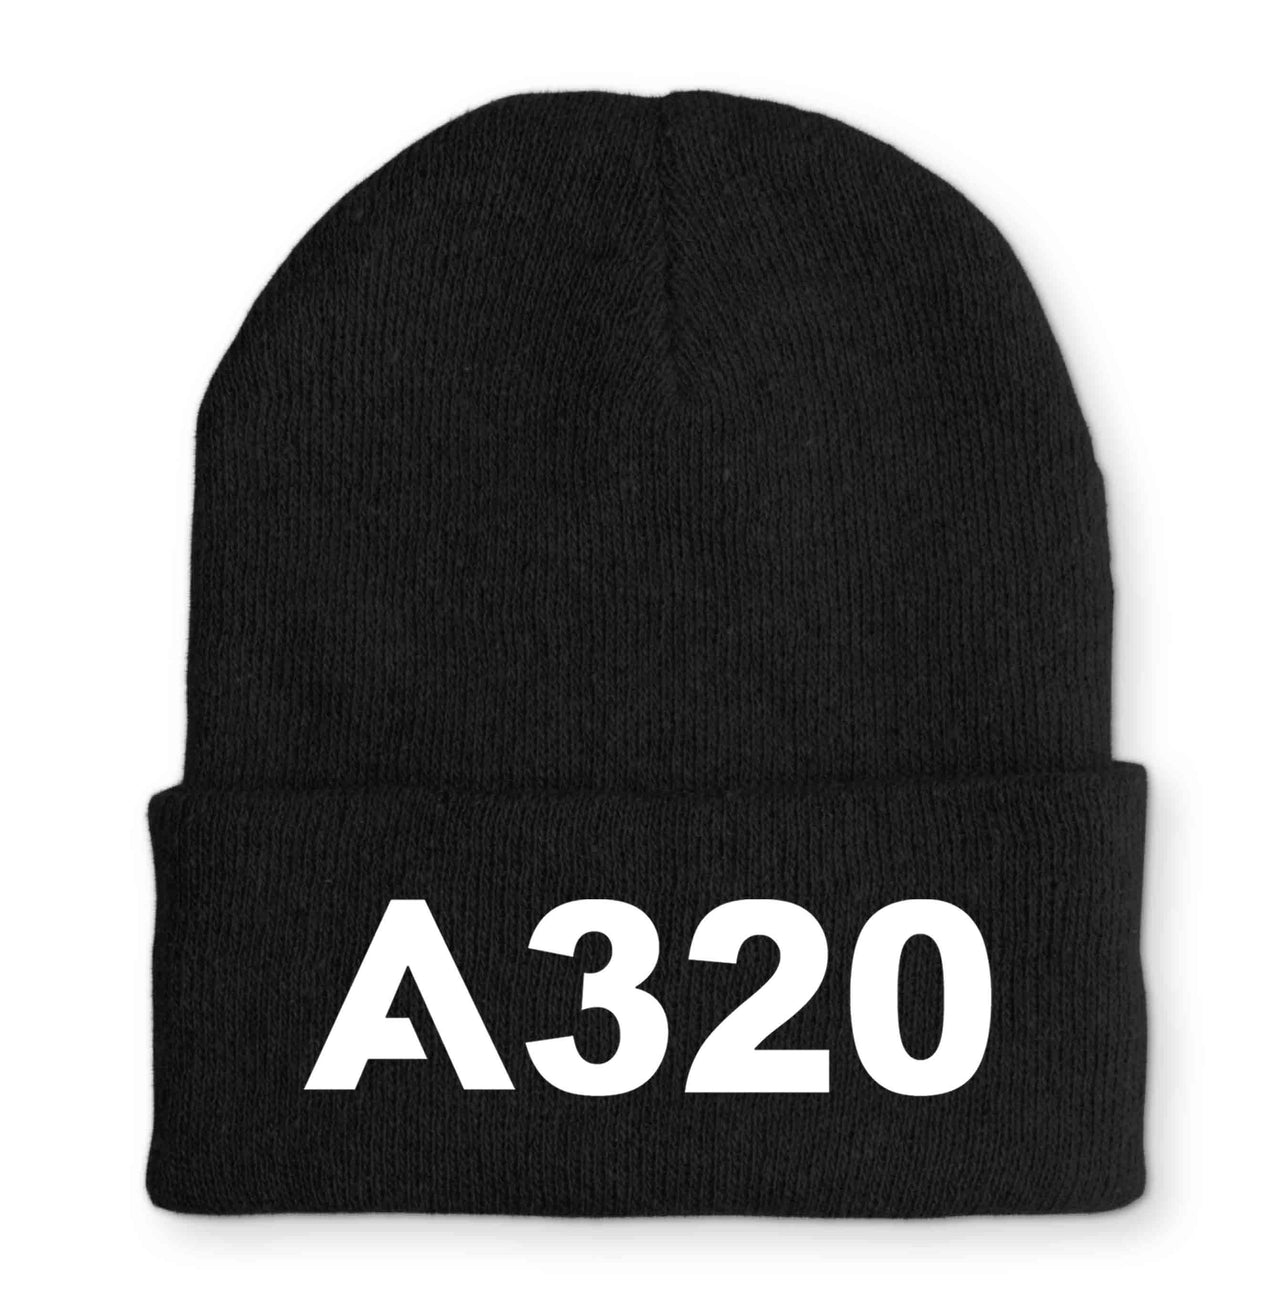 A320 Flat Text Embroidered Beanies